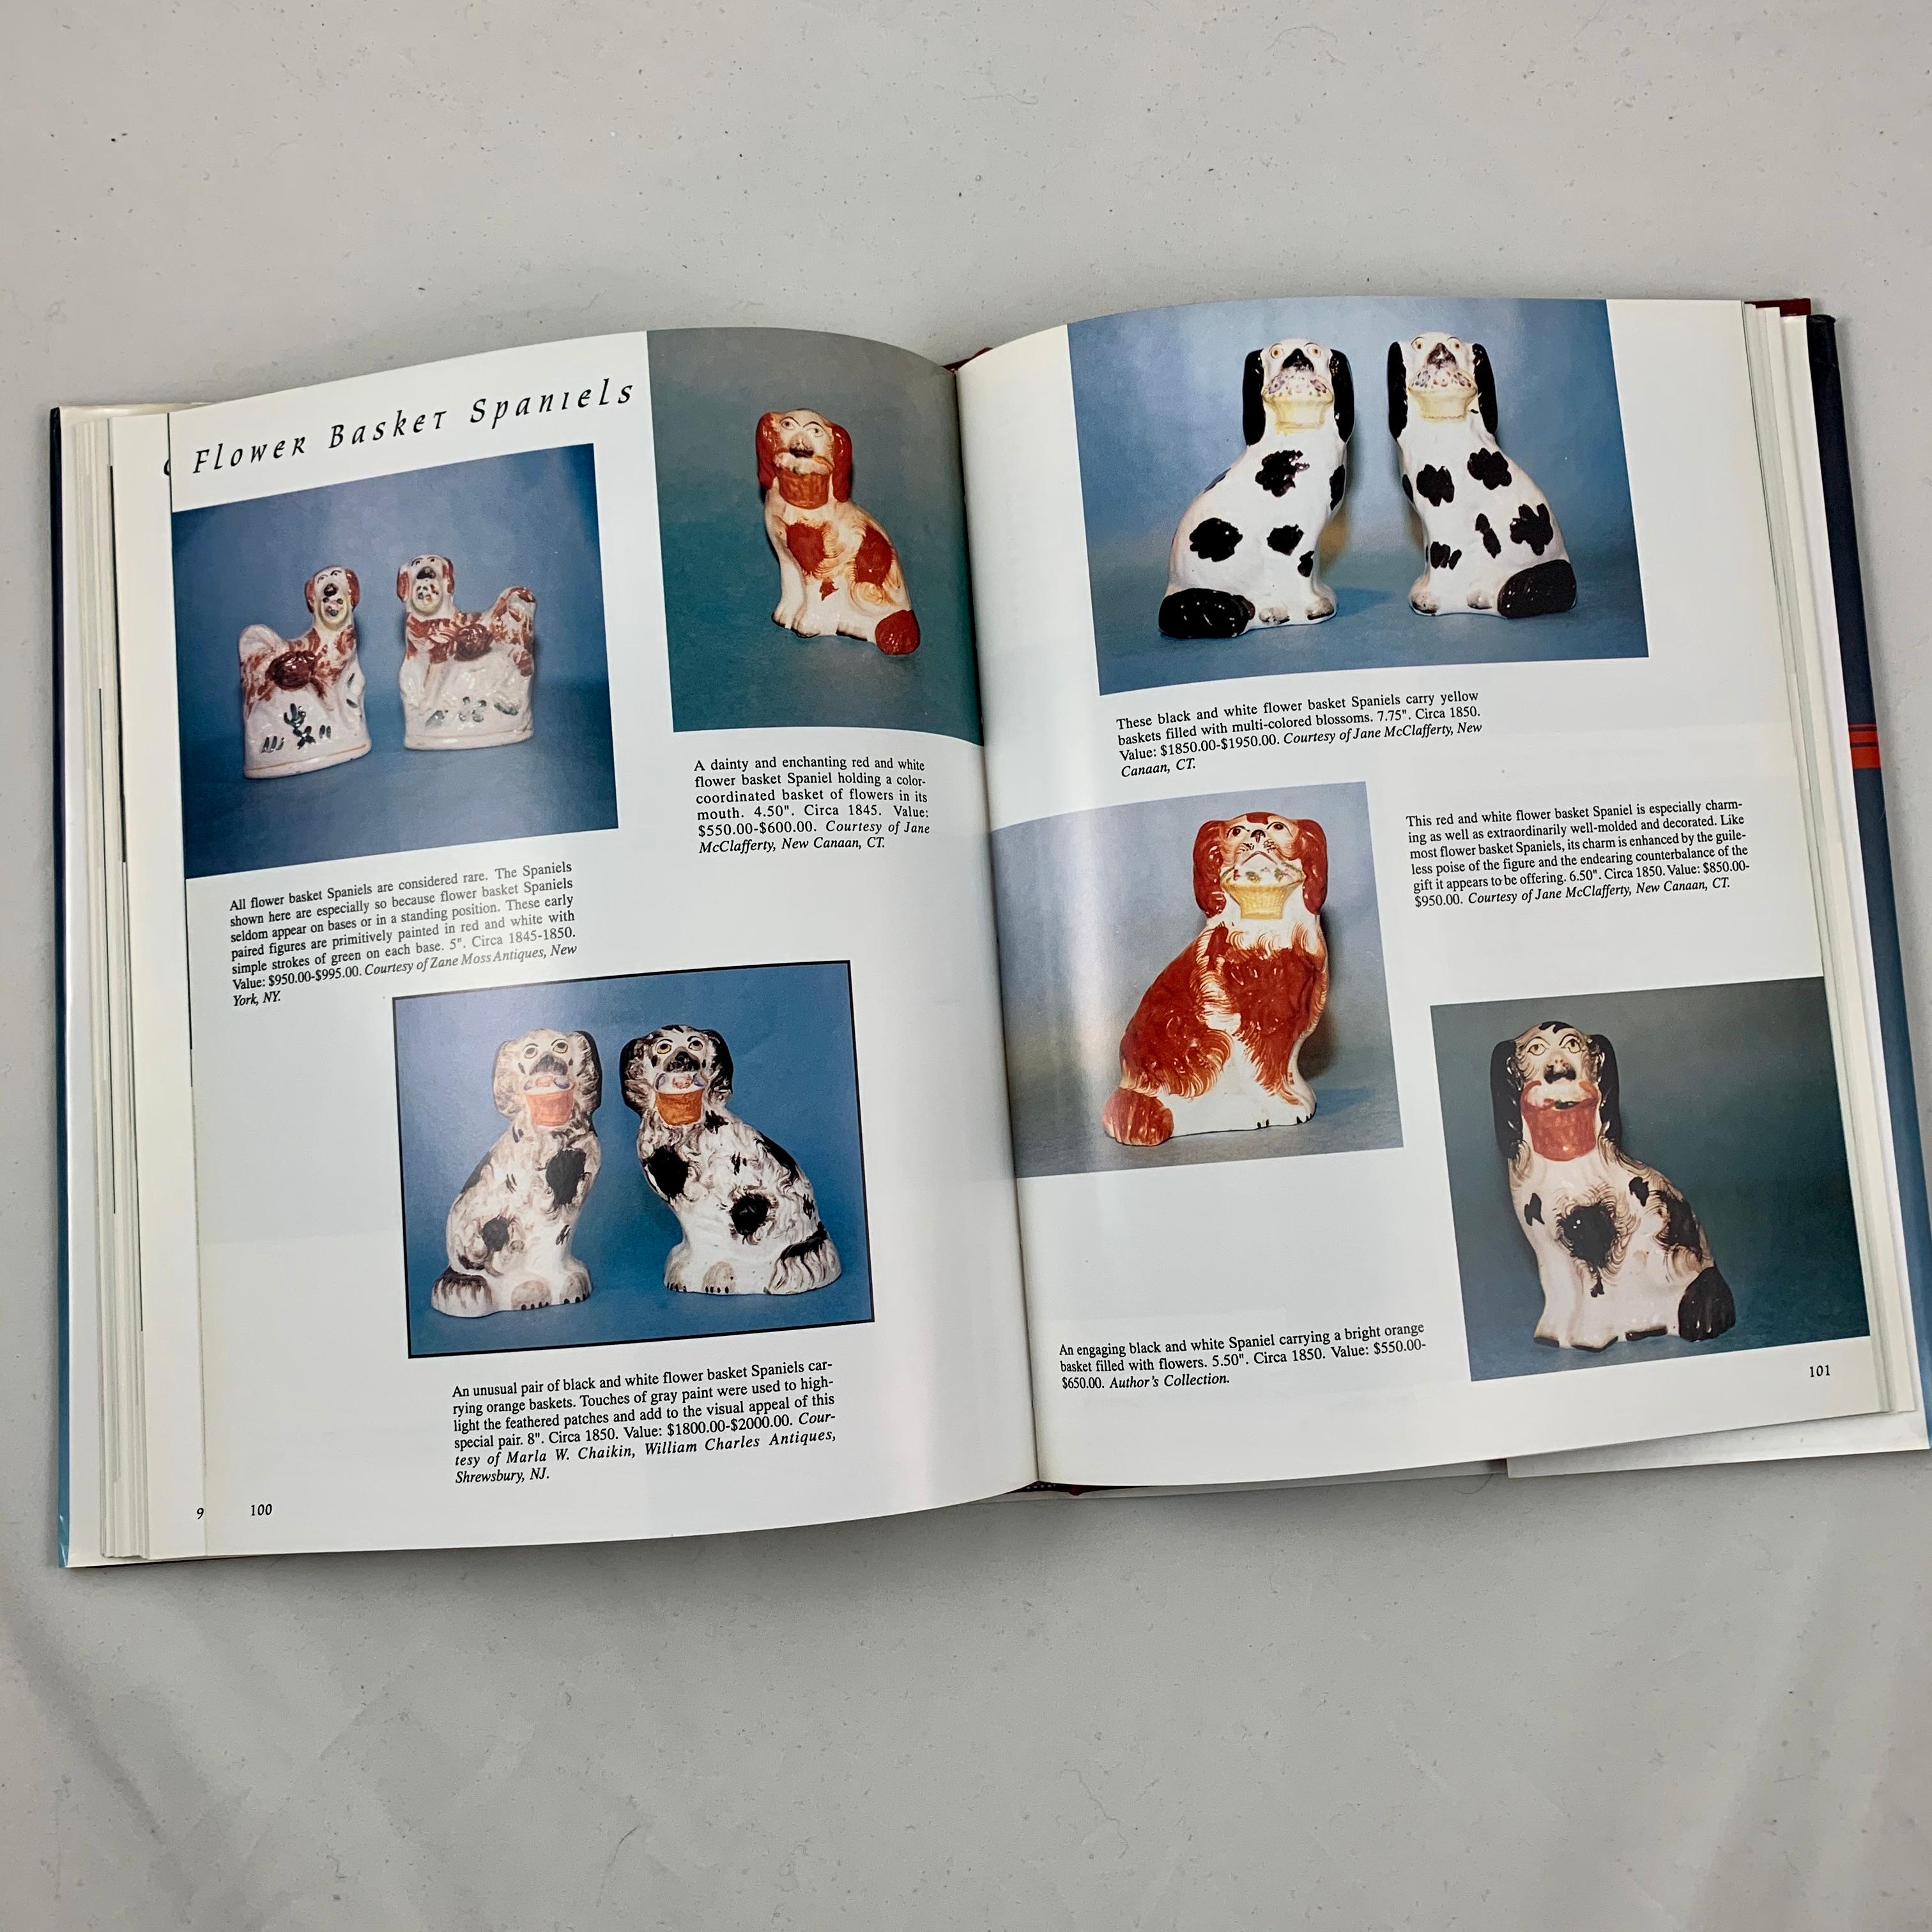 Machine-Made Staffordshire Spaniels, a Collector’s Guide, by Adele Kenny, First Edition